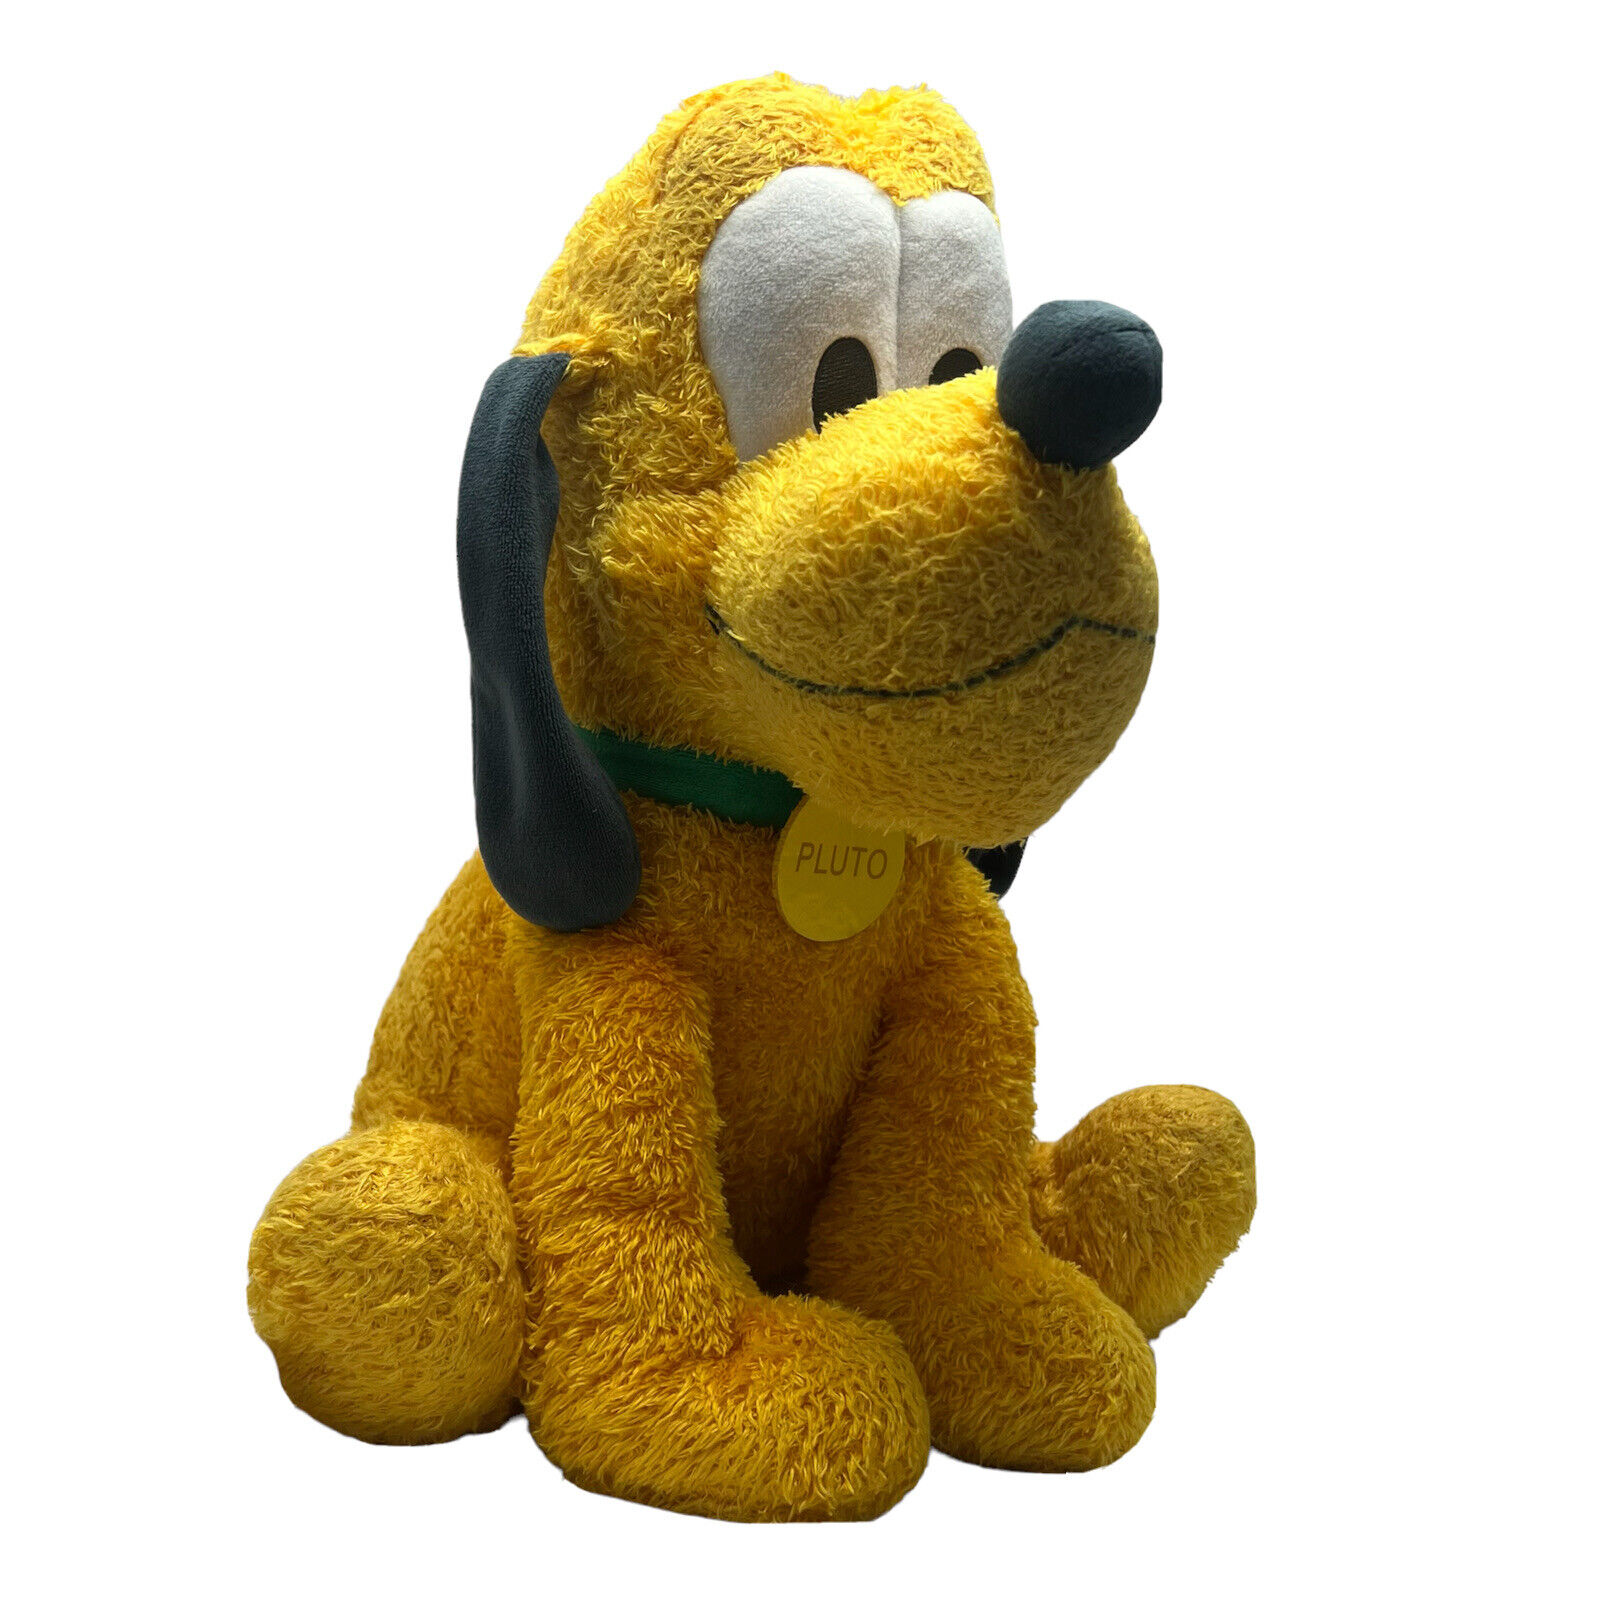 Pluto Weighted Plush Medium 14\'\' Disney Parks Exclusive Missing Weight Souvenir